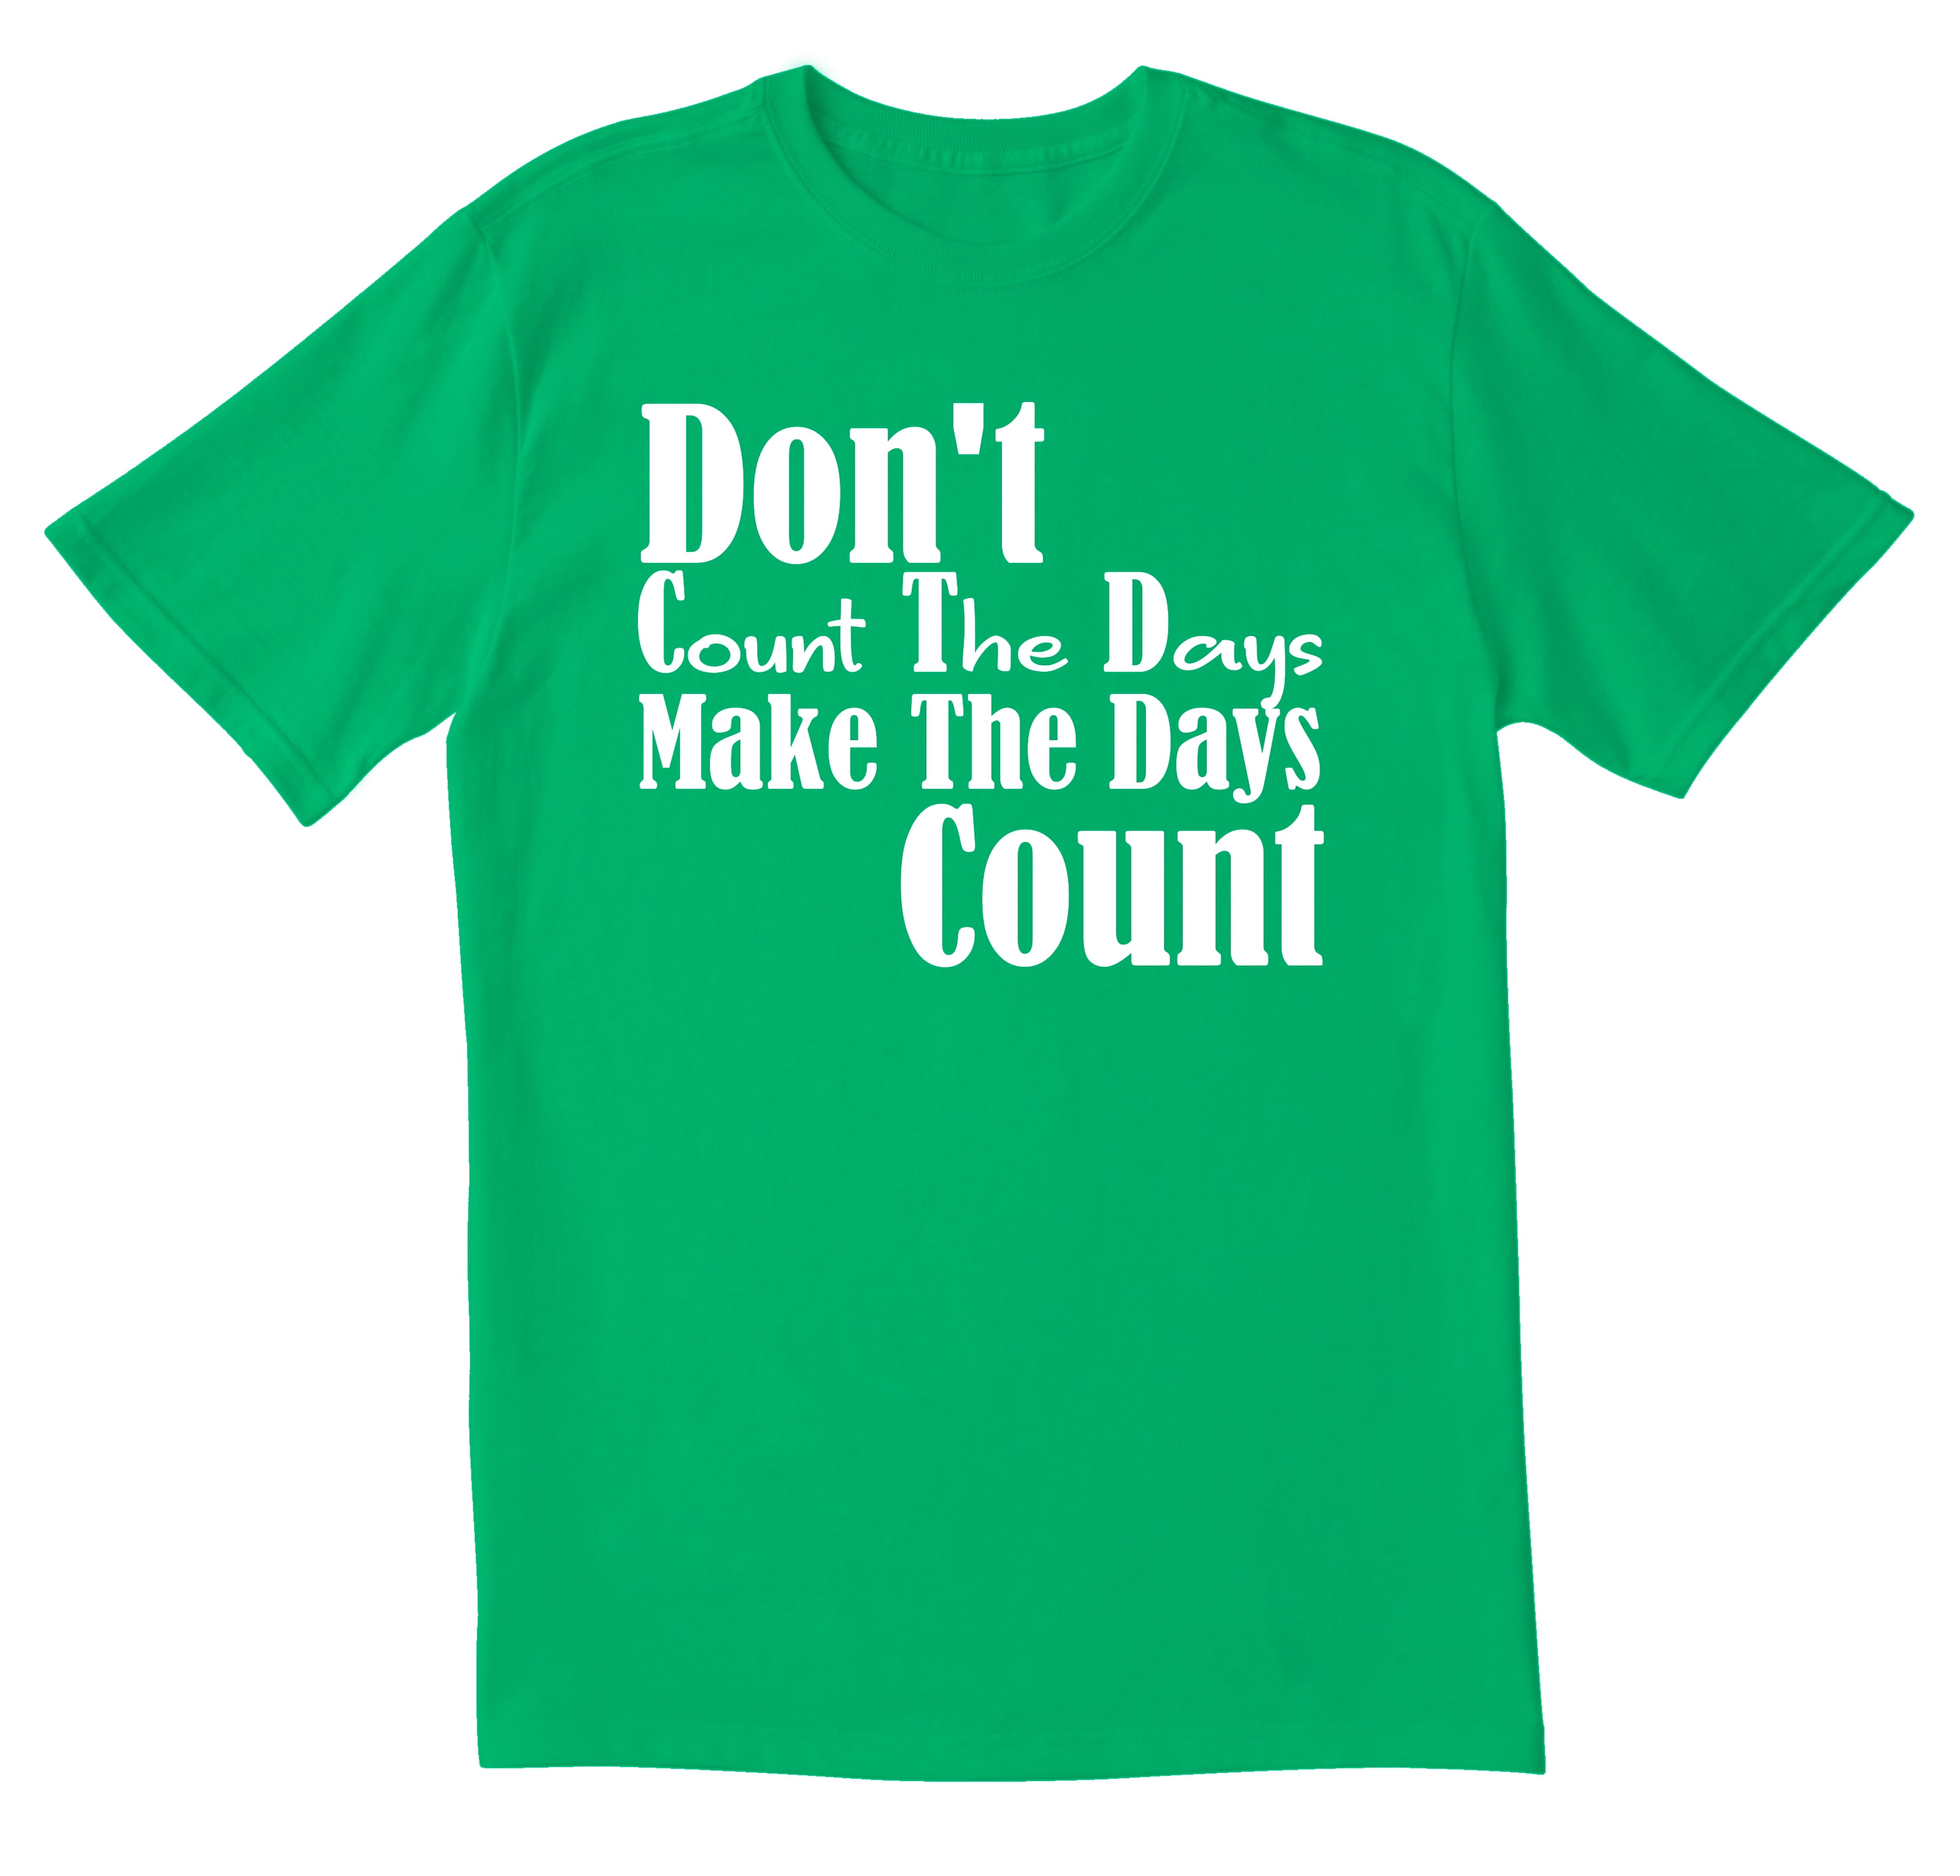 Don't Count The Days Make Days Count T-Shirt Funny Sarcasm Joke Gift Novelty